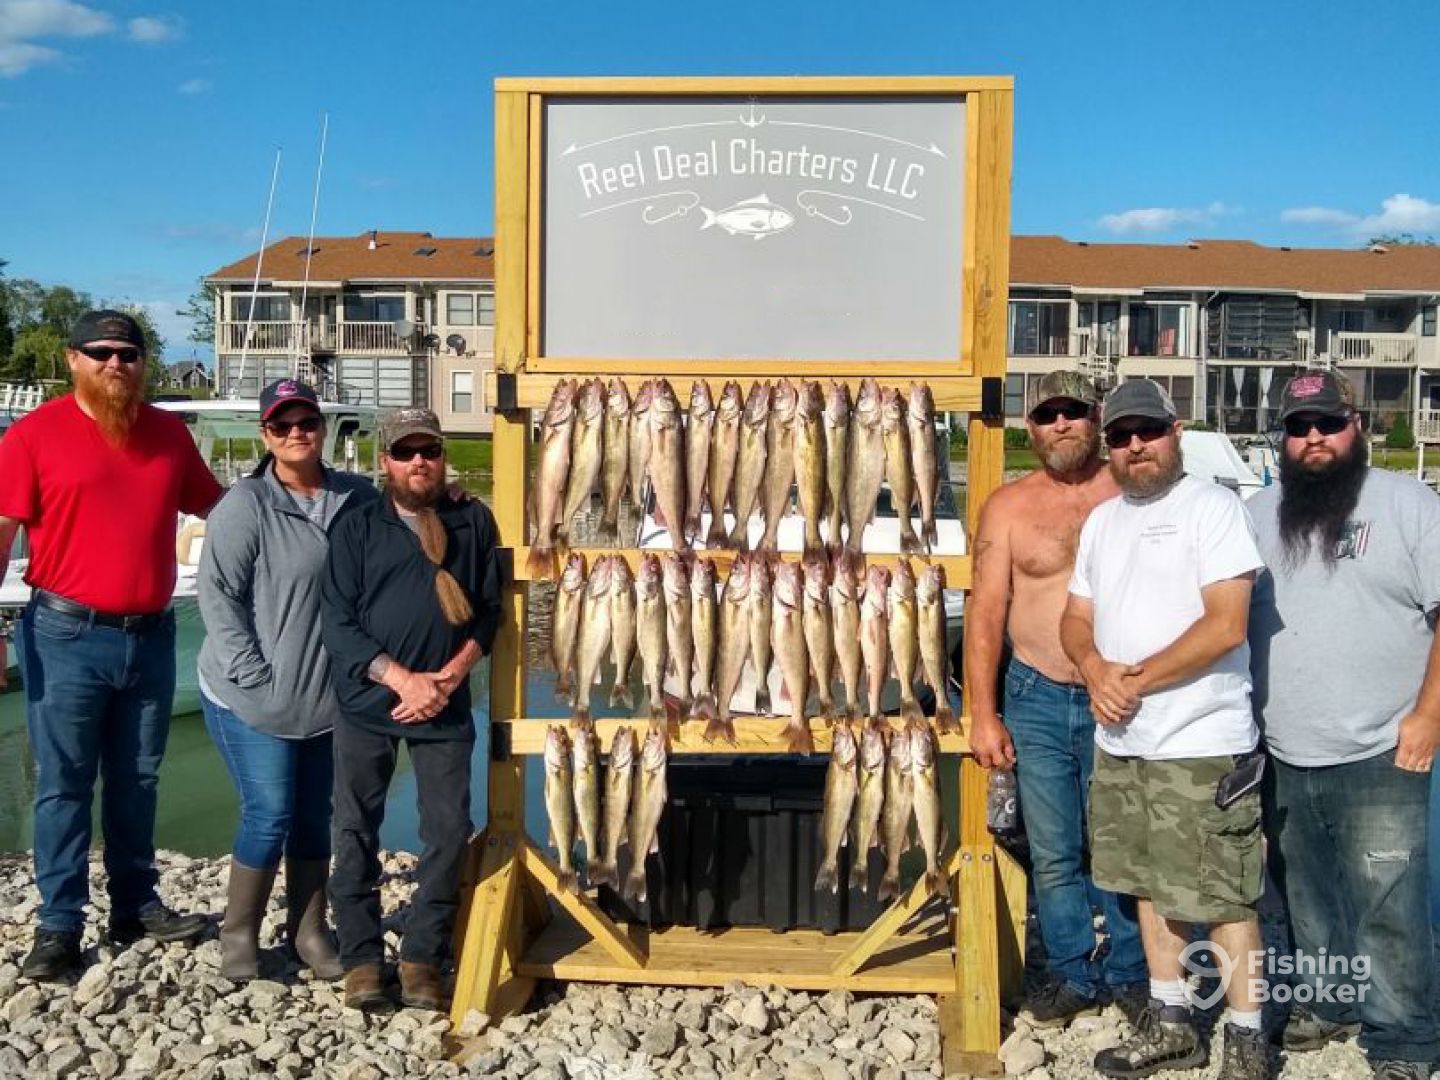 Reel Deal Charters Llc Oak Harbor Updated 2020 Prices Oh Fishingbooker